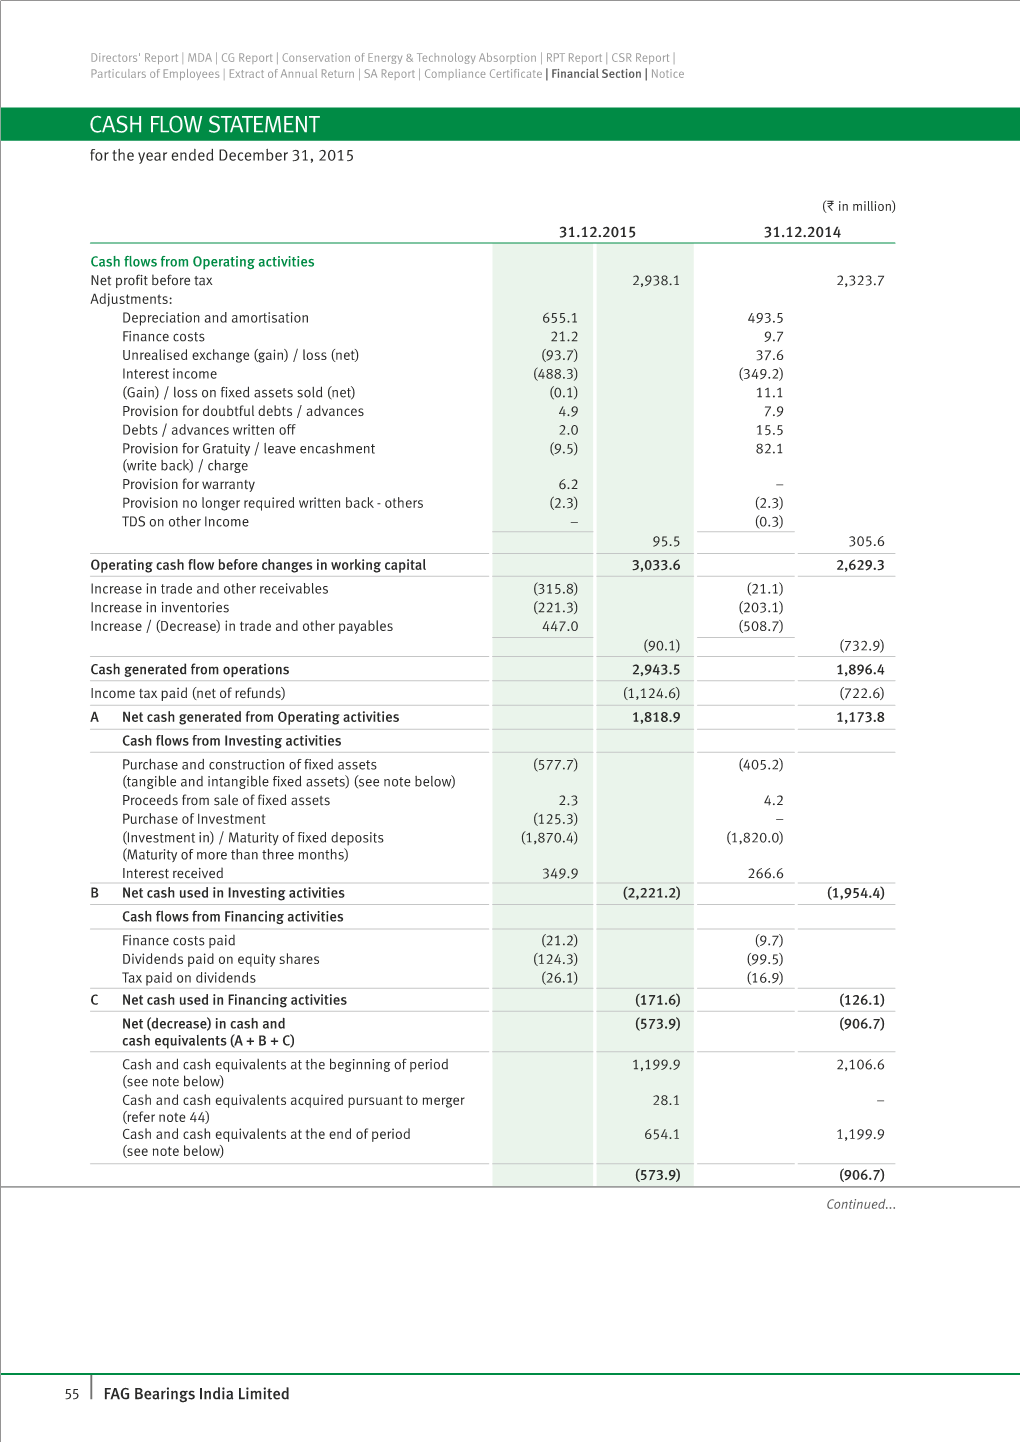 CASH FLOW STATEMENT for the Year Ended December 31, 2015